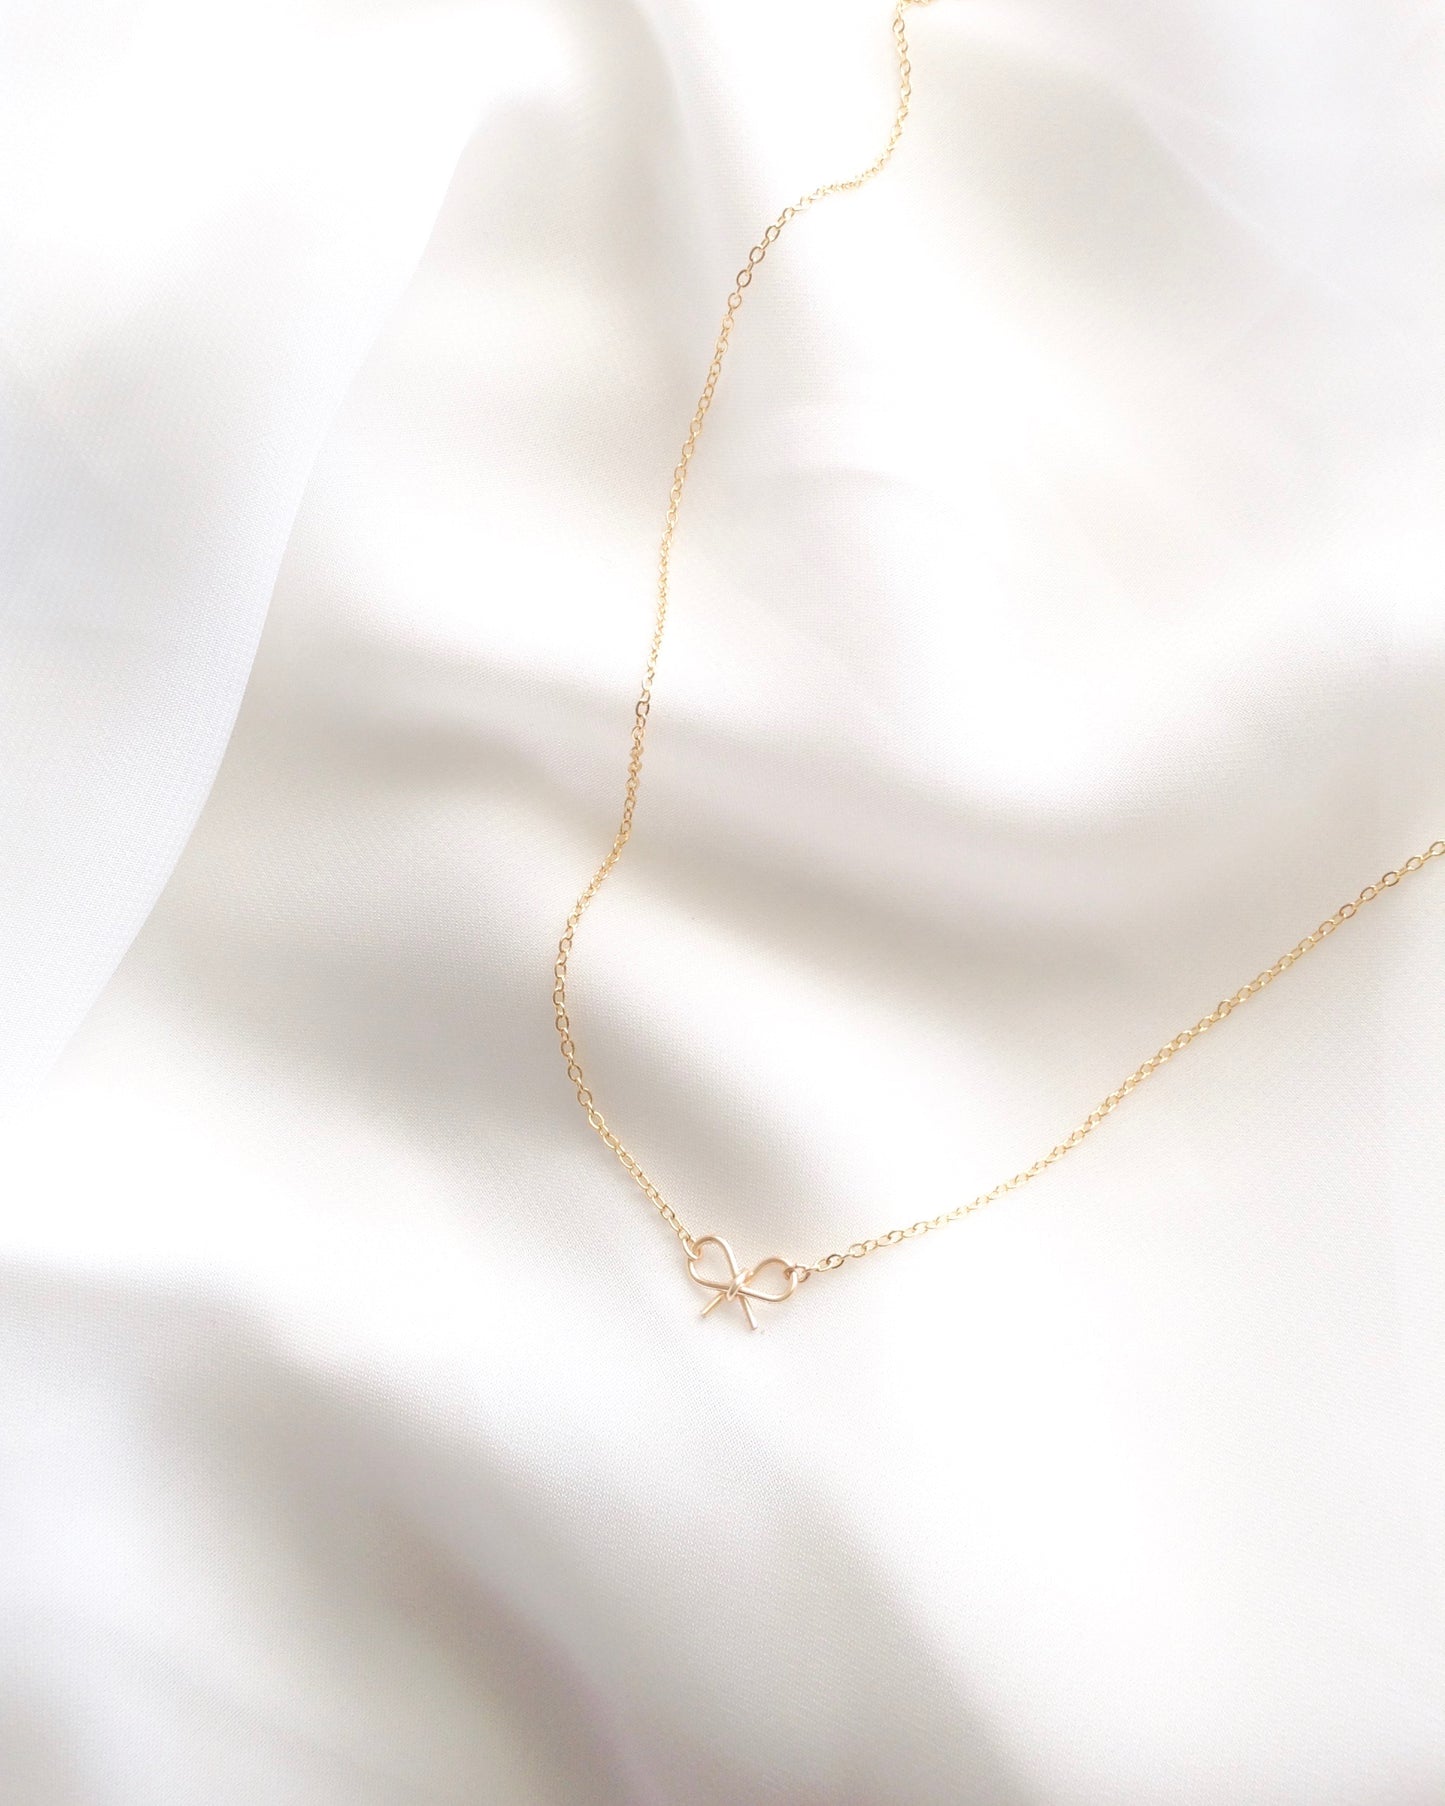 Simple Bow Necklace in Gold Filled or Sterling Silver | IB Jewelry